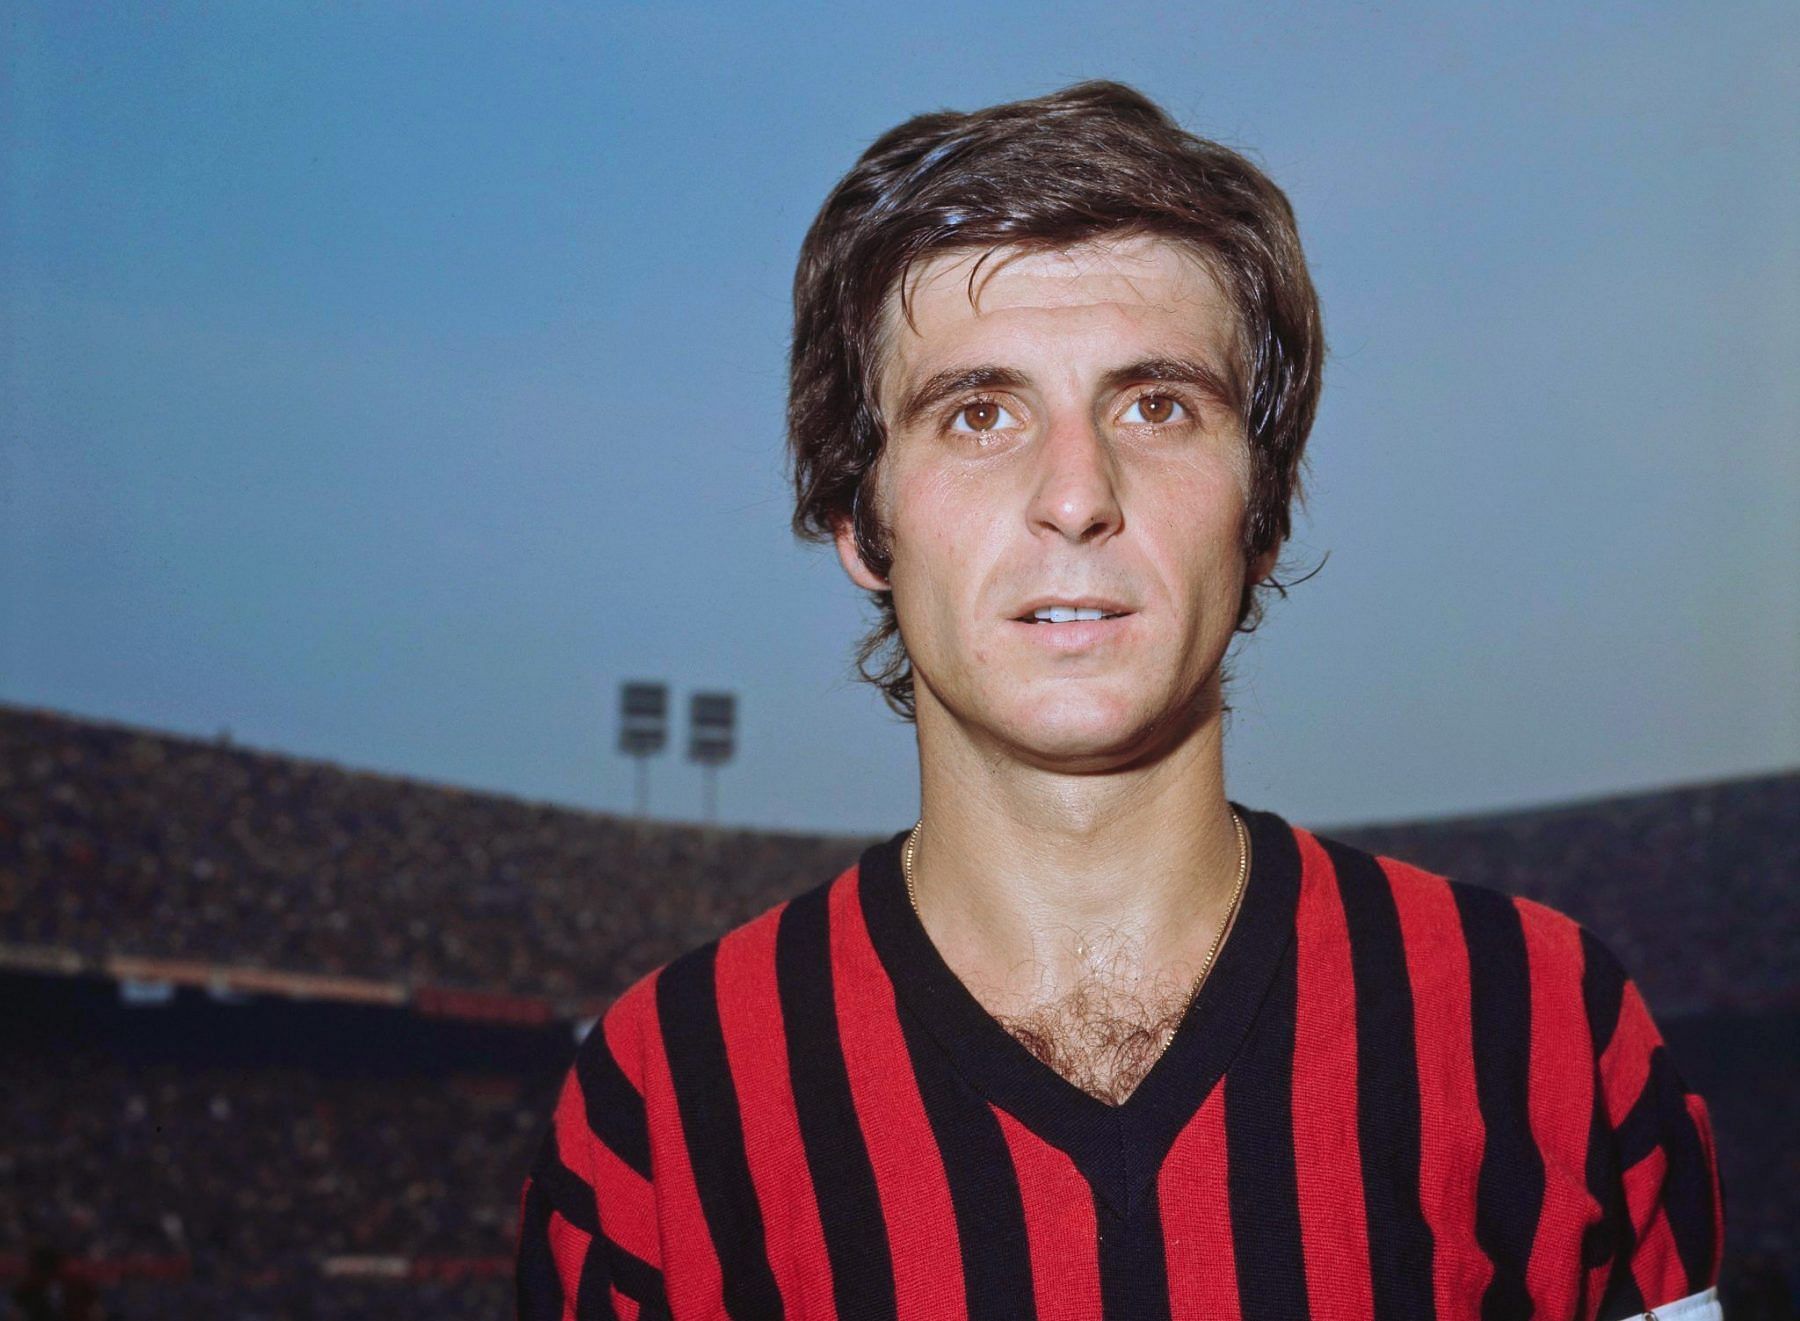 Italy great Gianni Rivera made 600 appearances for AC Milan